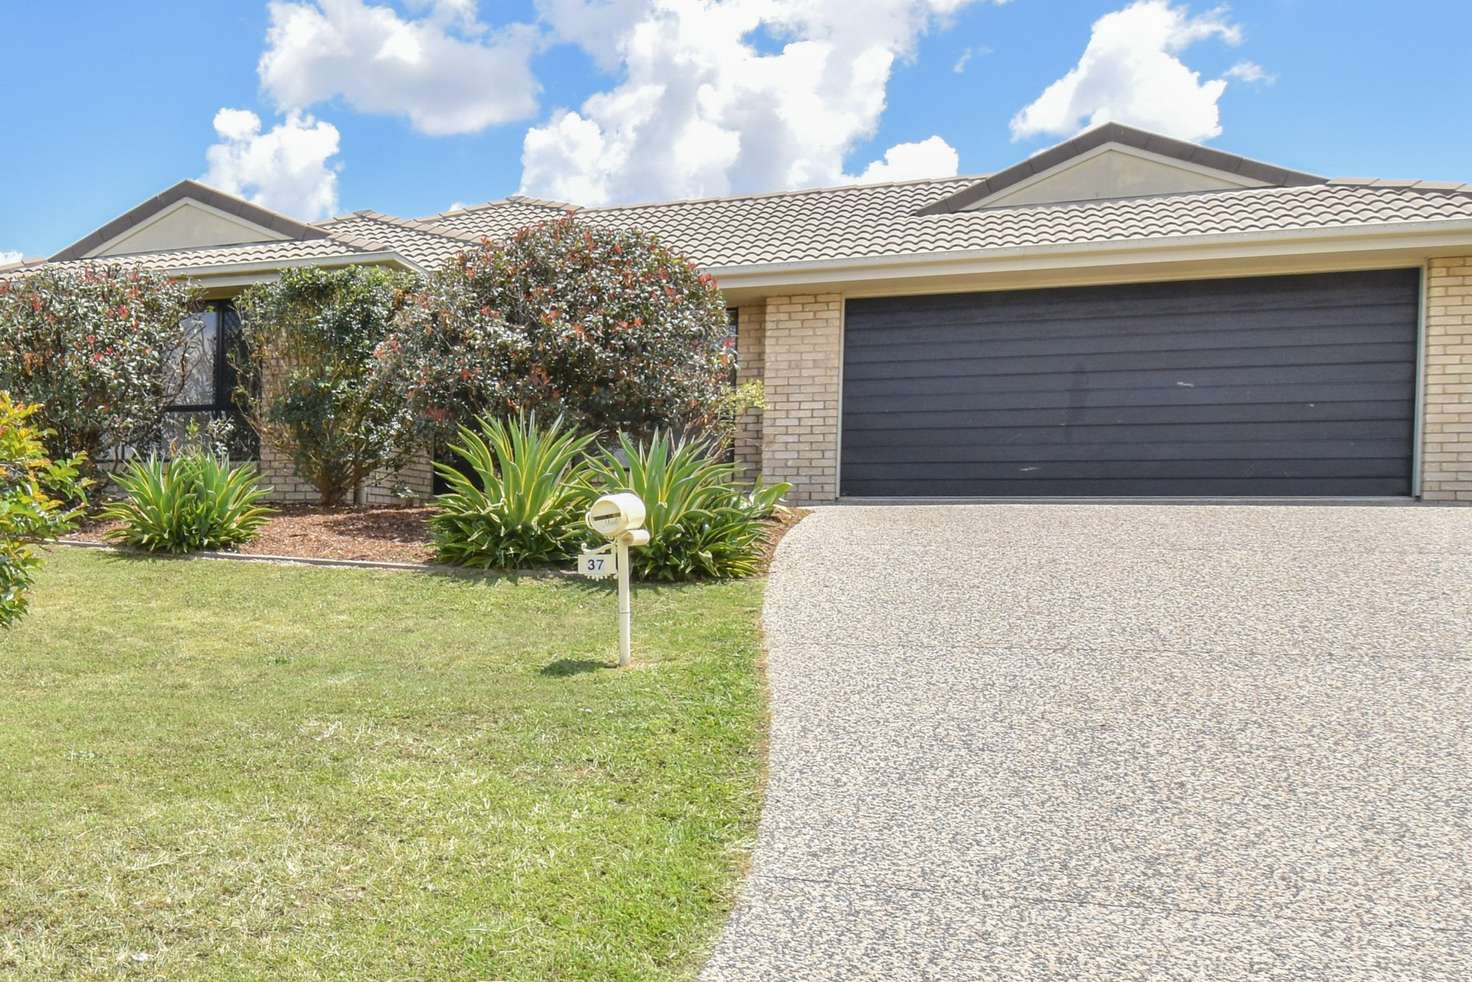 Main view of Homely house listing, 37 Sharon Drive, Warwick QLD 4370